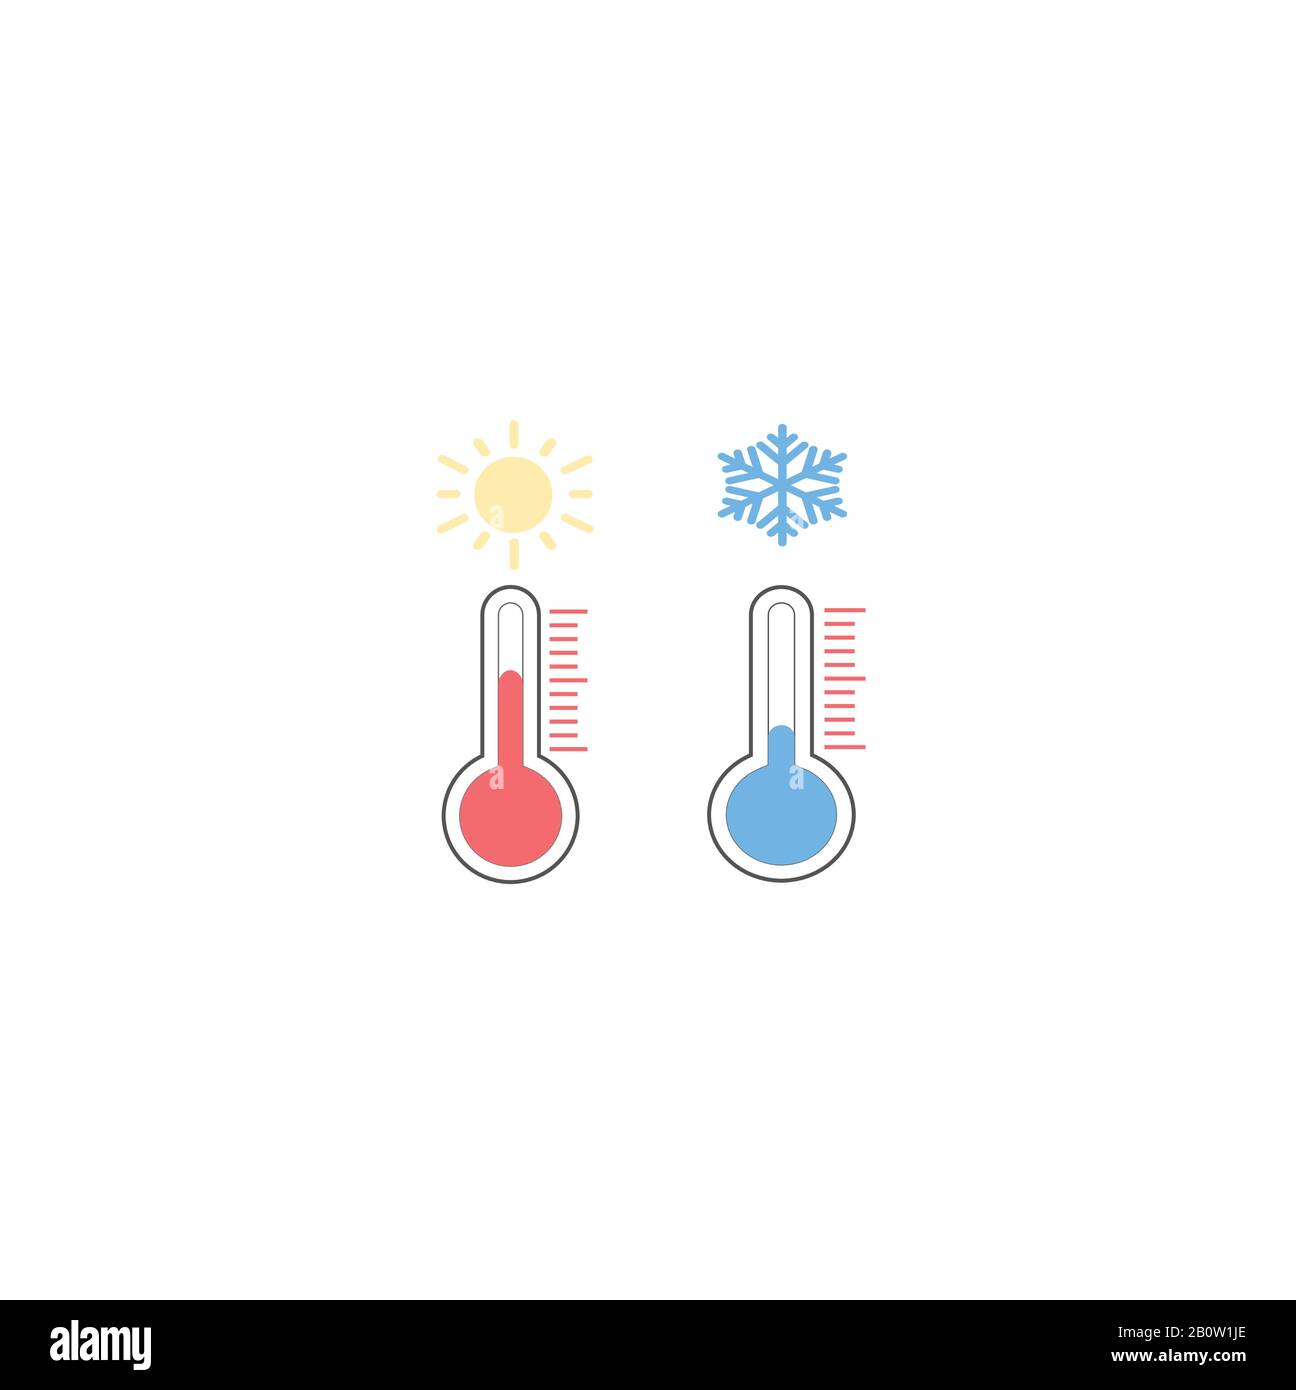 https://c8.alamy.com/comp/2B0W1JE/vector-collection-of-flat-weather-forecast-icons-thermometers-warm-temperature-and-cold-temperature-2B0W1JE.jpg